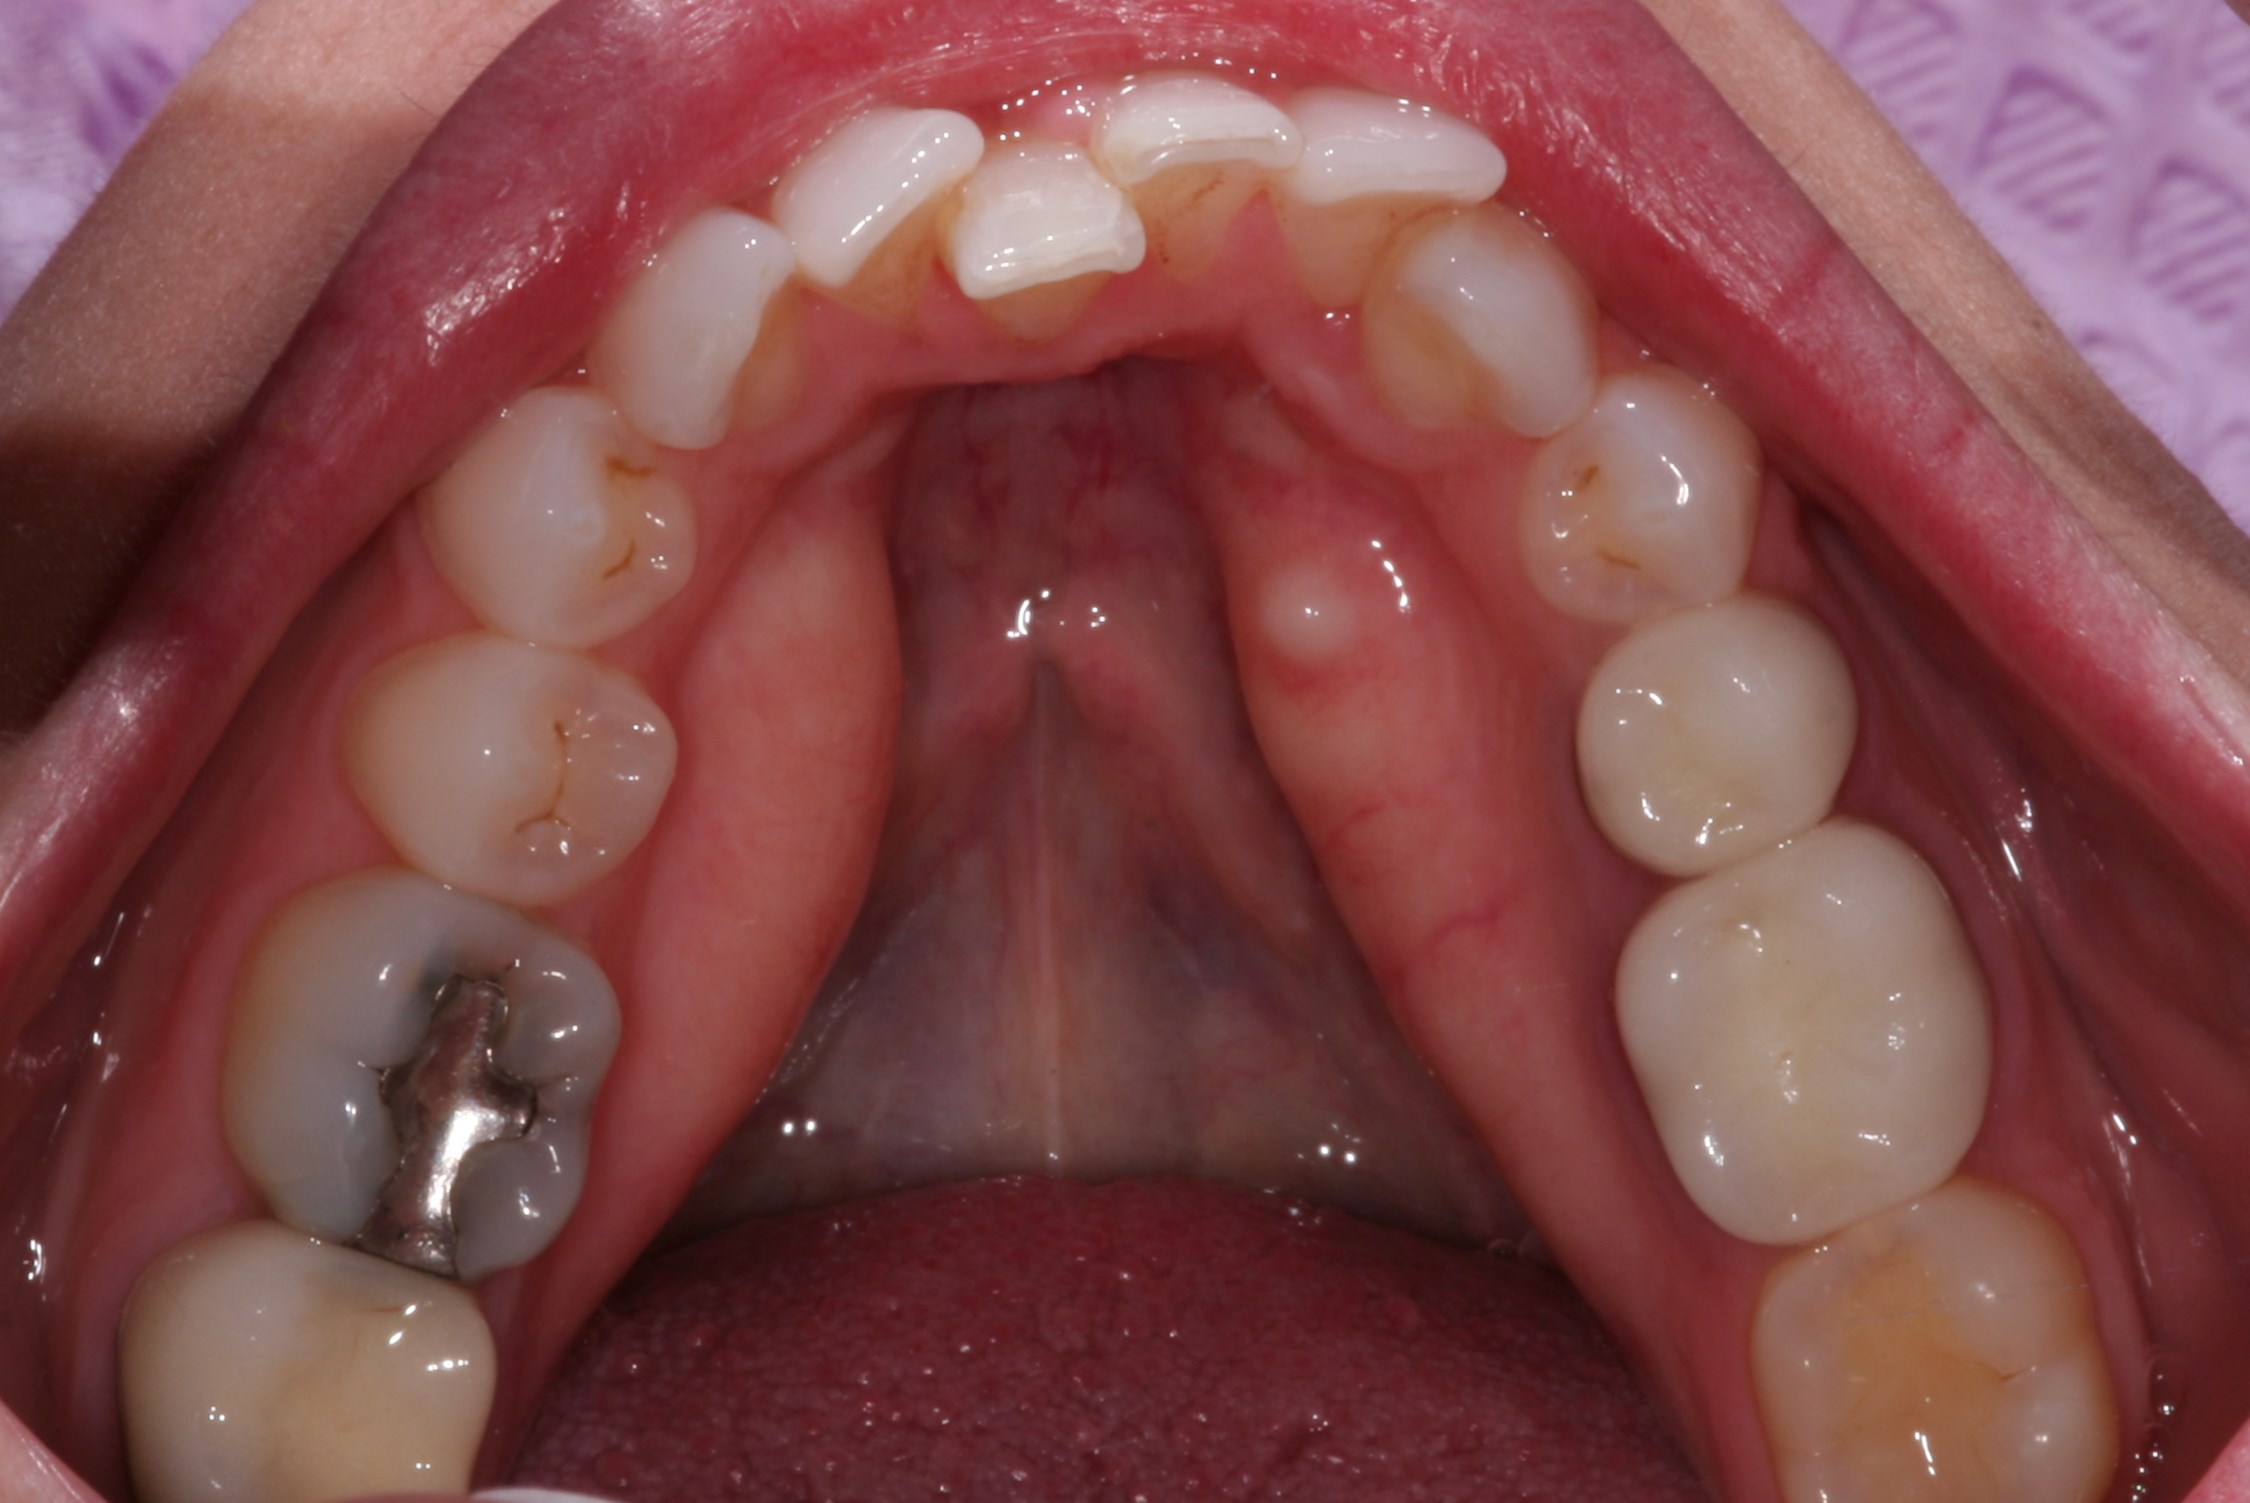 Patient's crooked bottom row teeth with cavities before dental work.